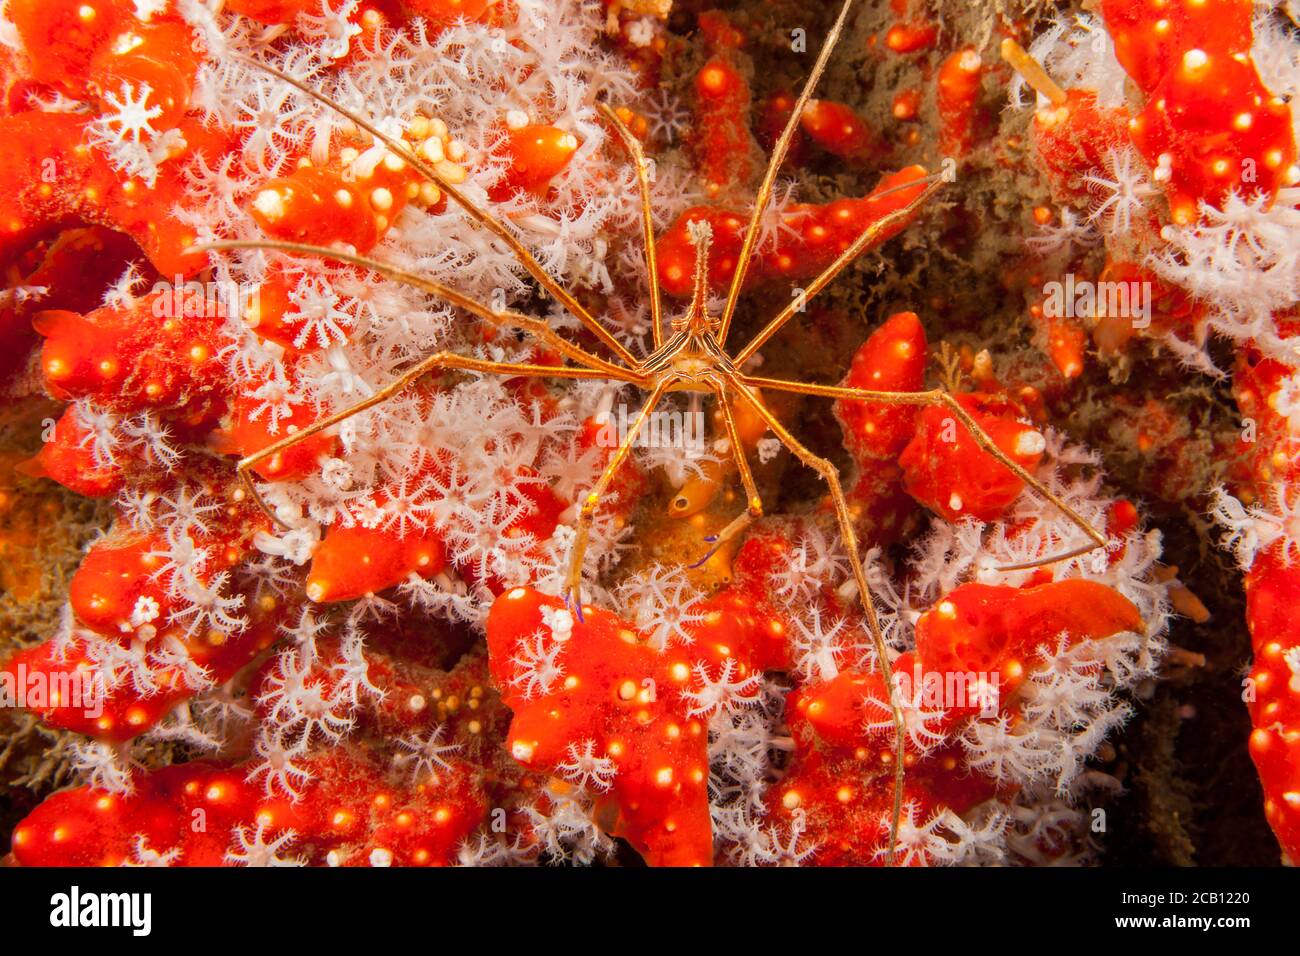 The yellow line arrow crab, Stenorhynchus seticornis, is abundant in the Caribbean and on the reefs in Florida where this image was taken. Stock Photo